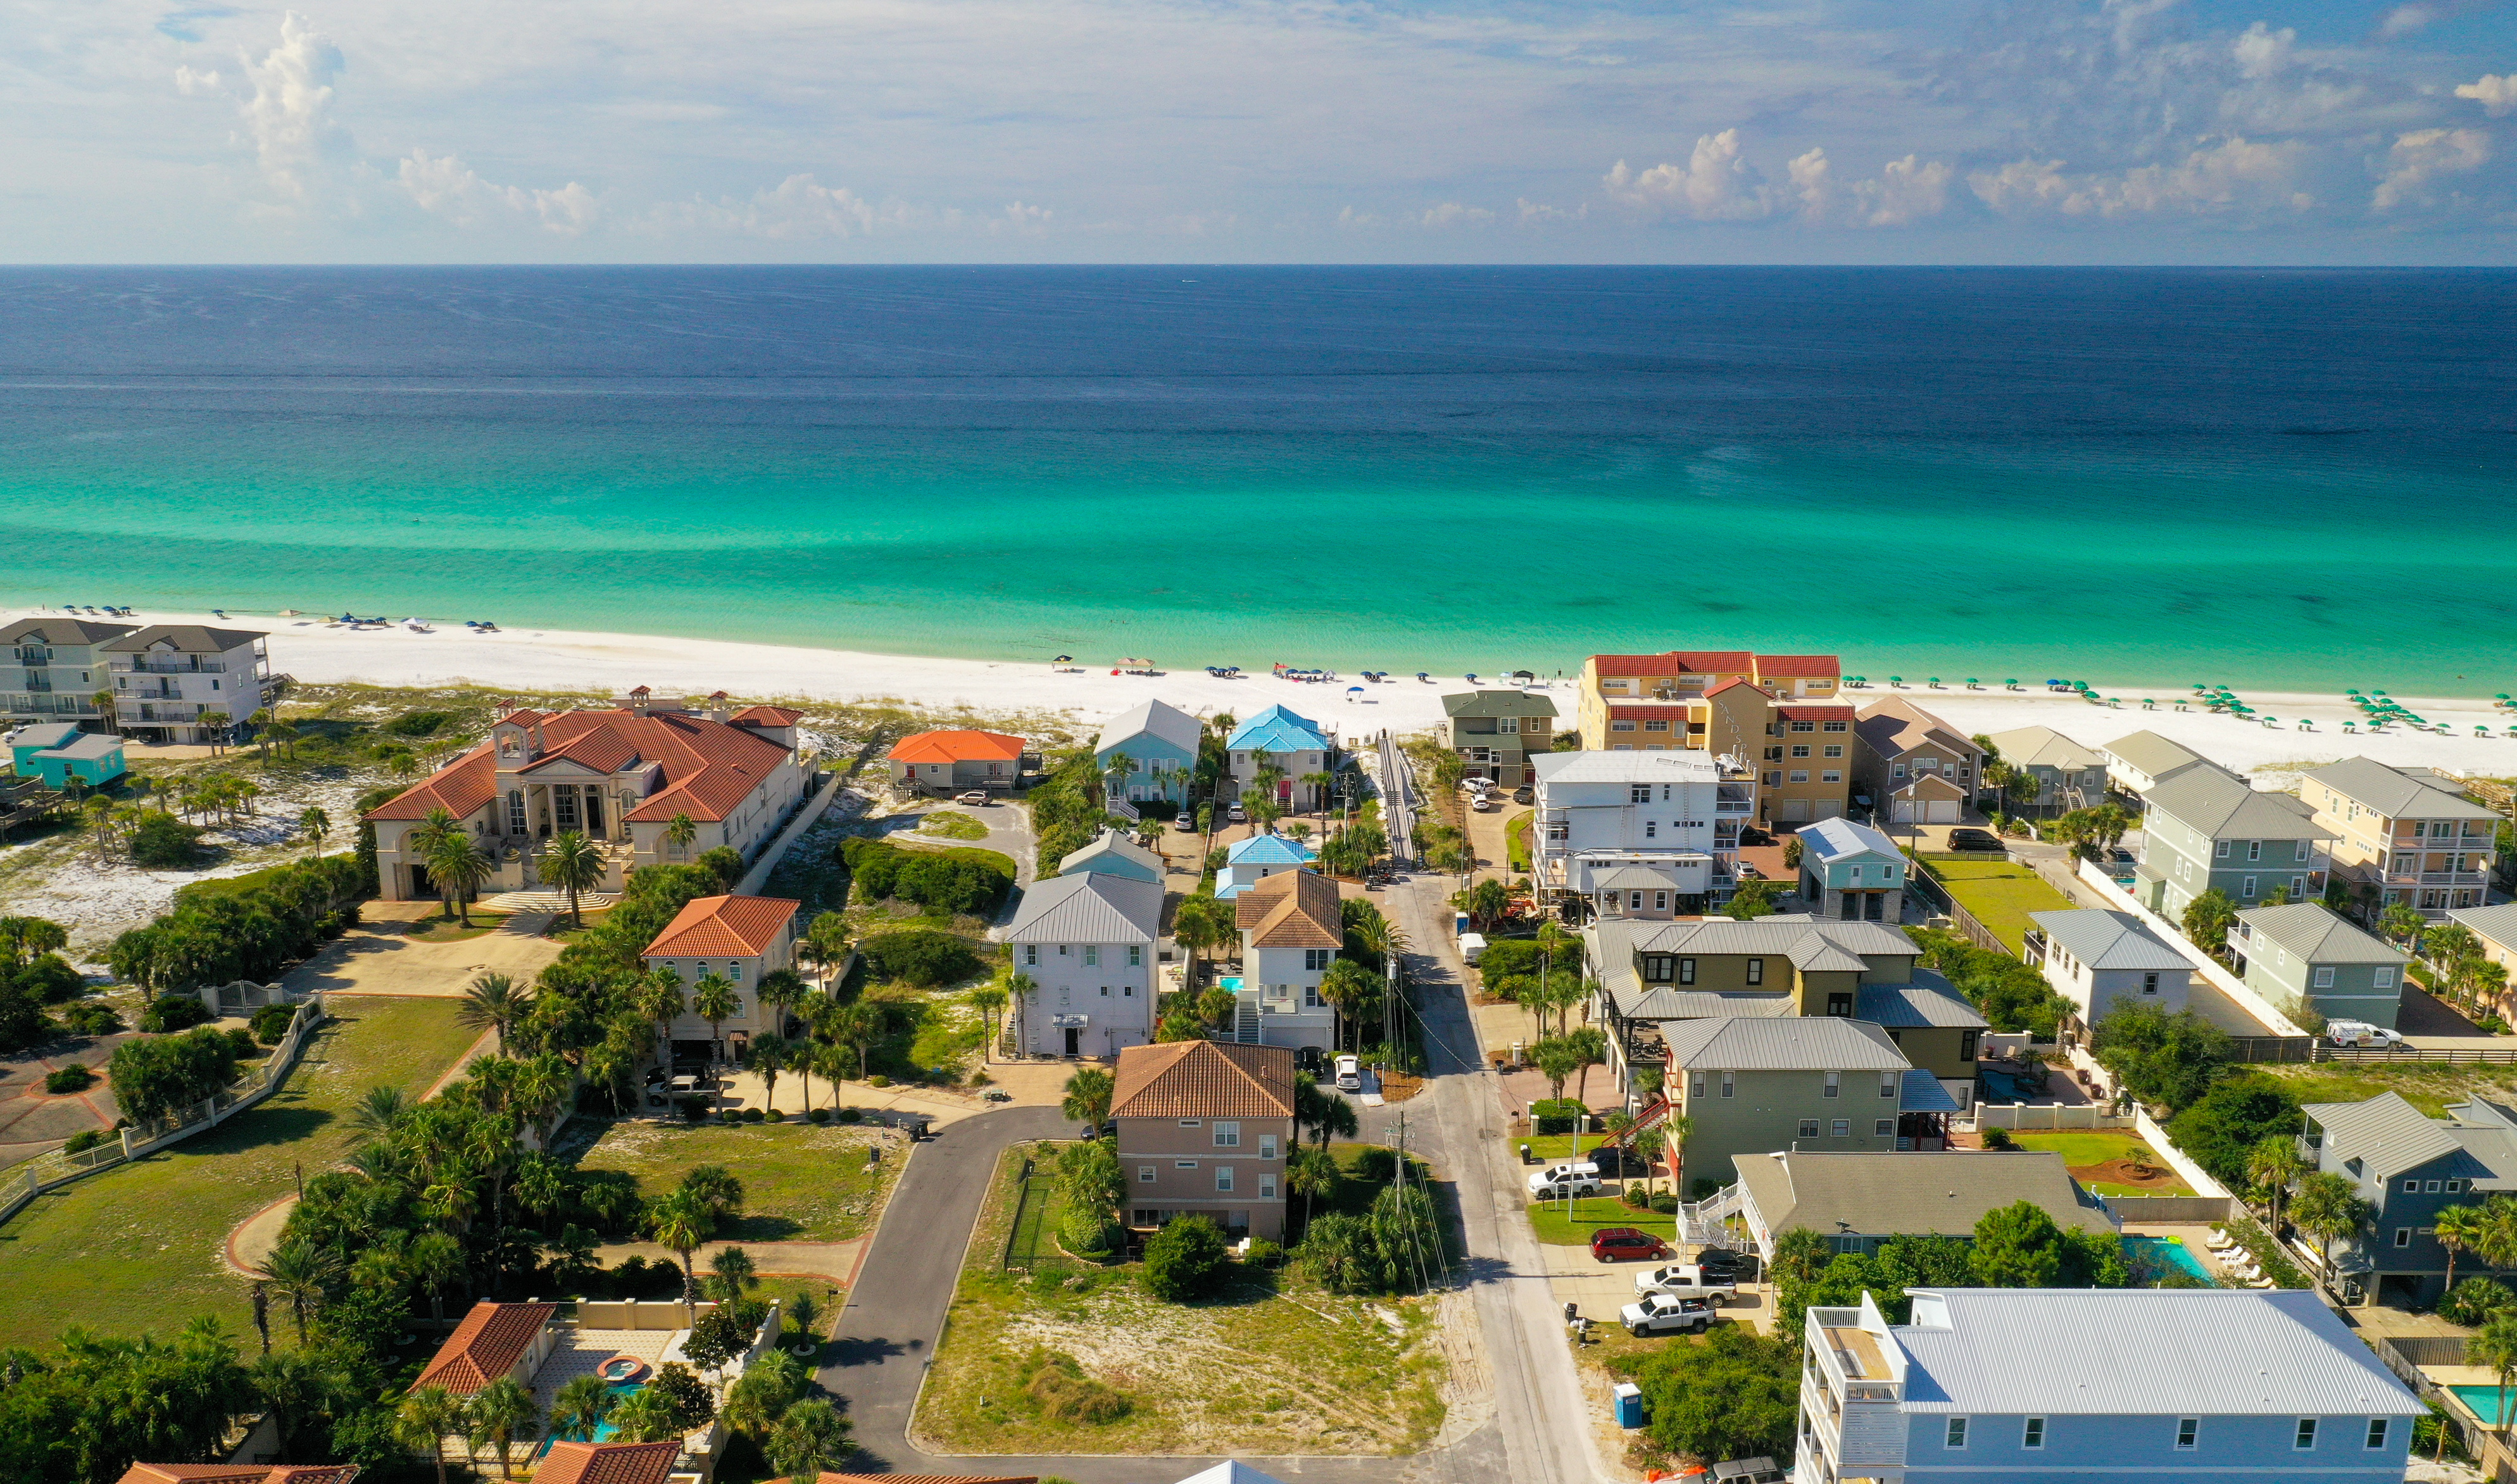 An aerial view of homes and land in Miramar Beach with the brilliant blue gulf waters in the background